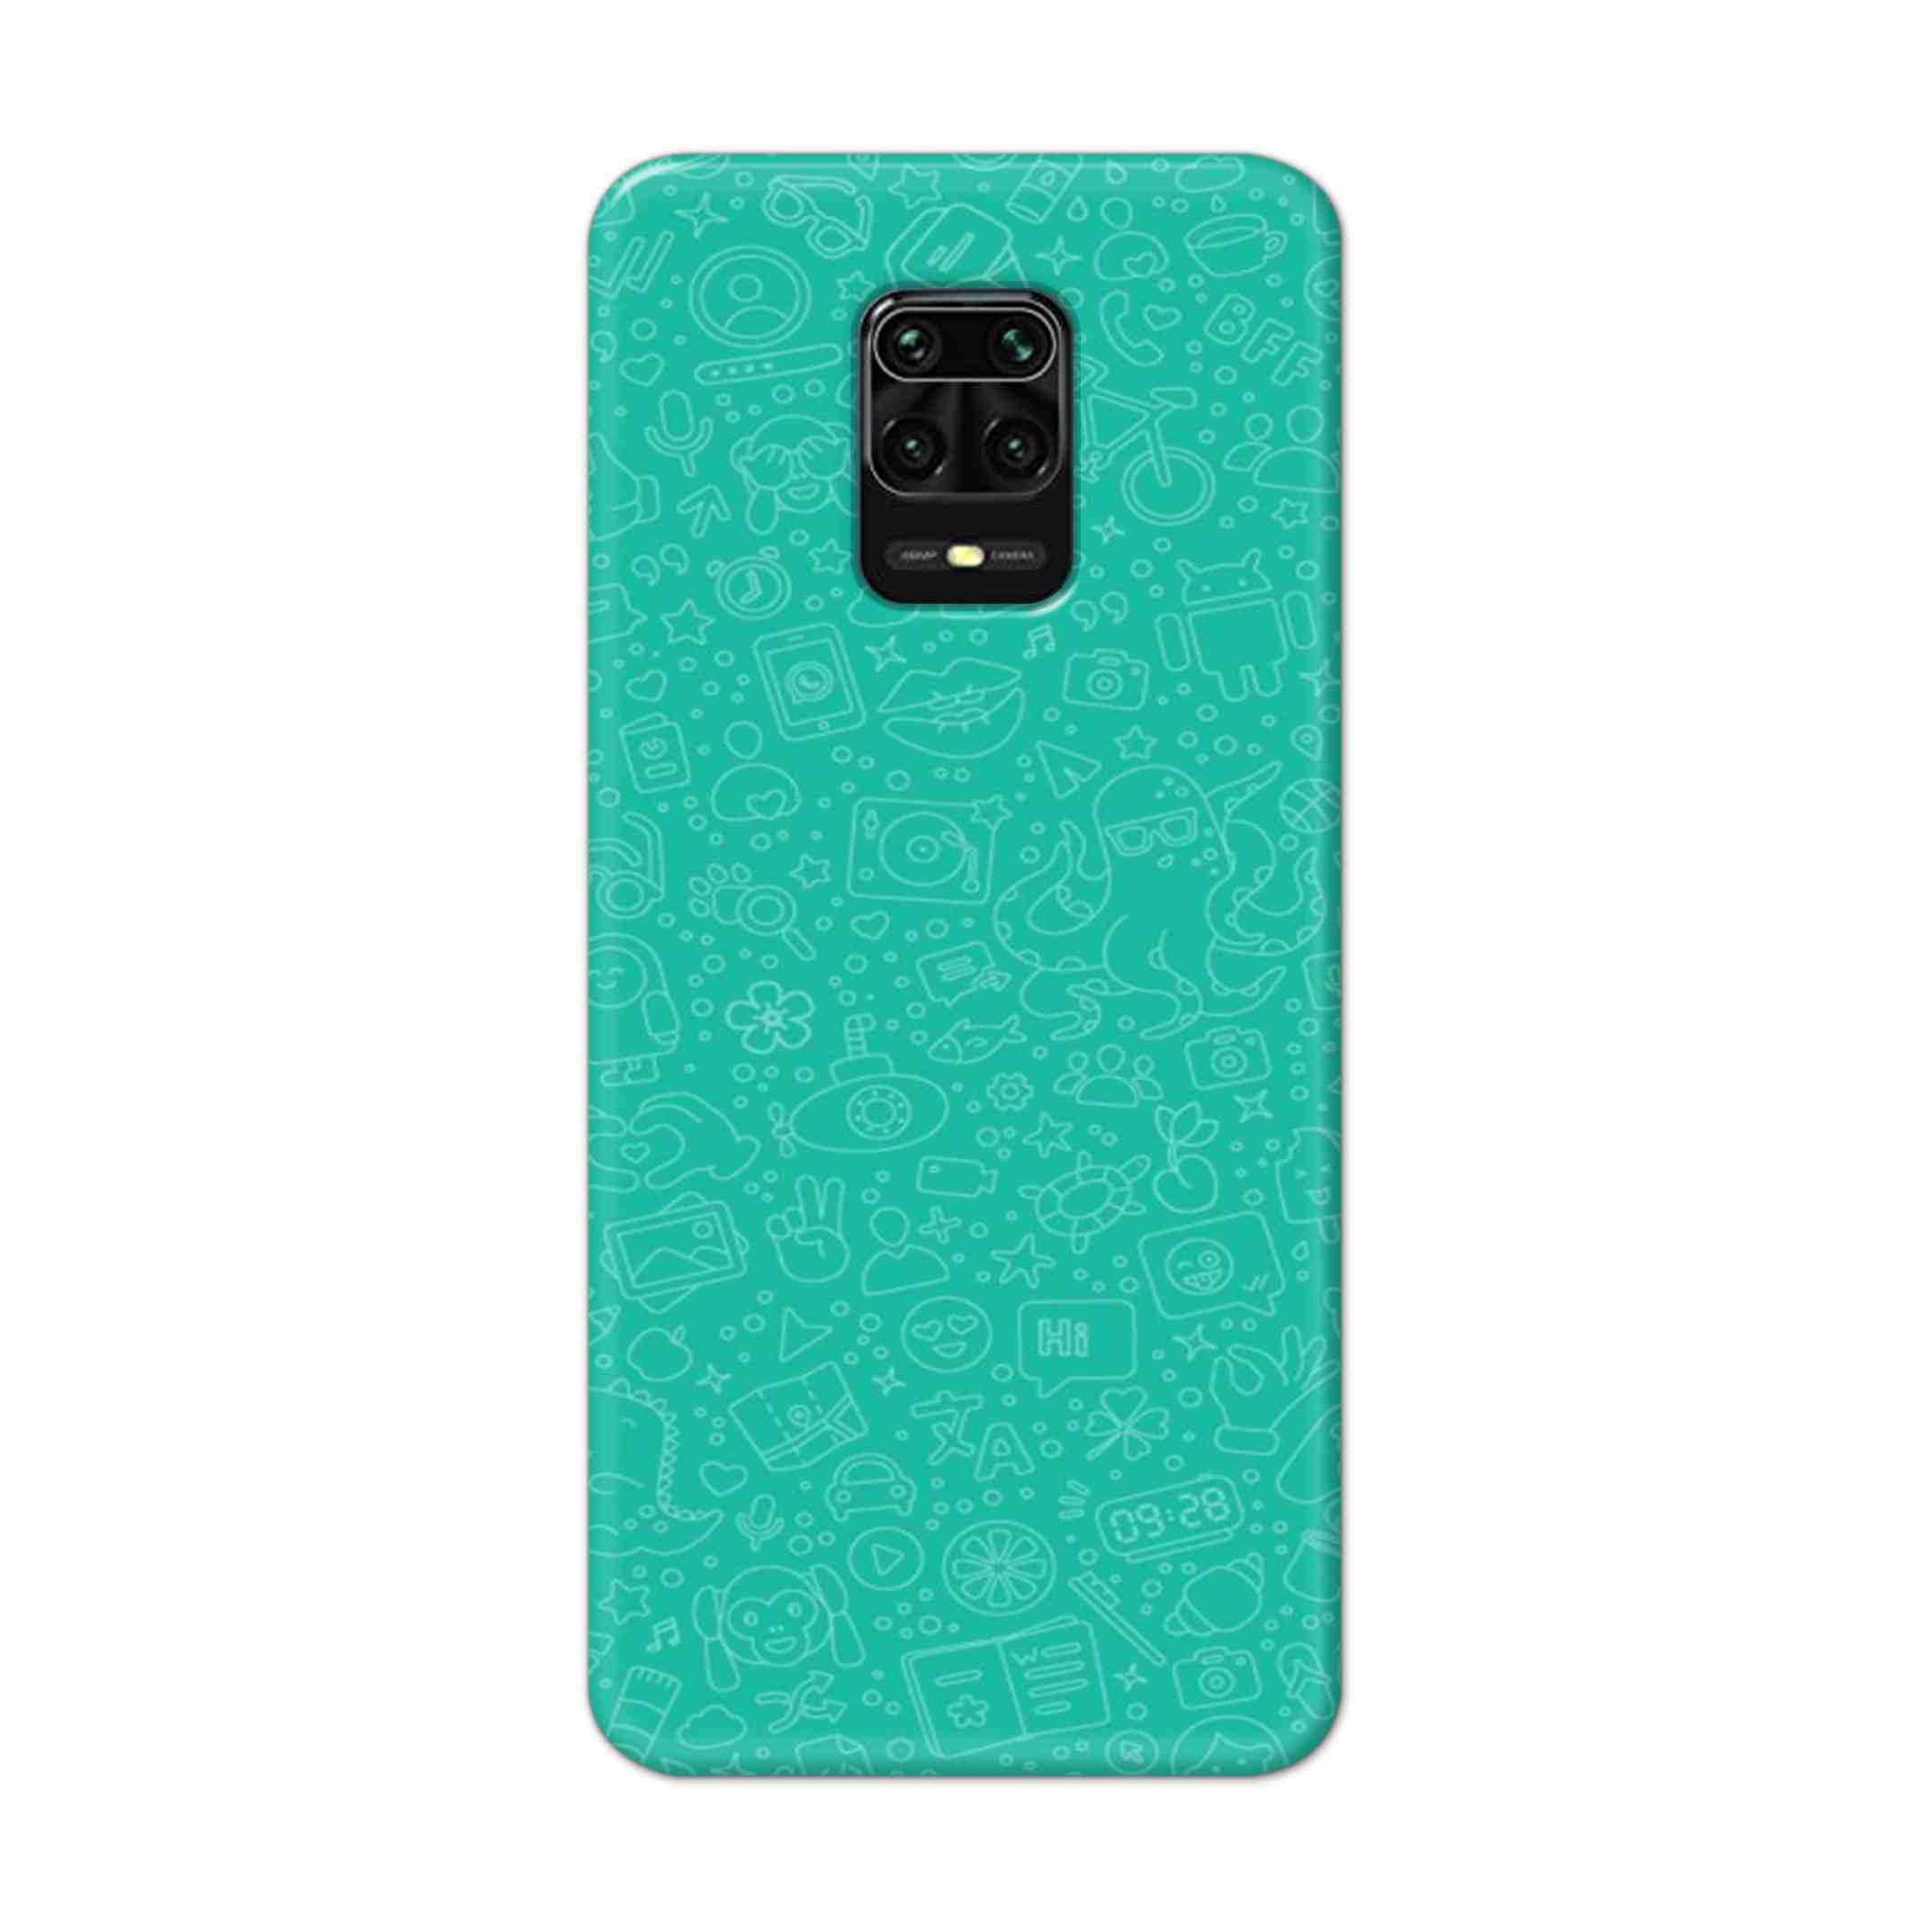 Buy Whatsapp Hard Back Mobile Phone Case Cover For Redmi Note 9 Pro Online